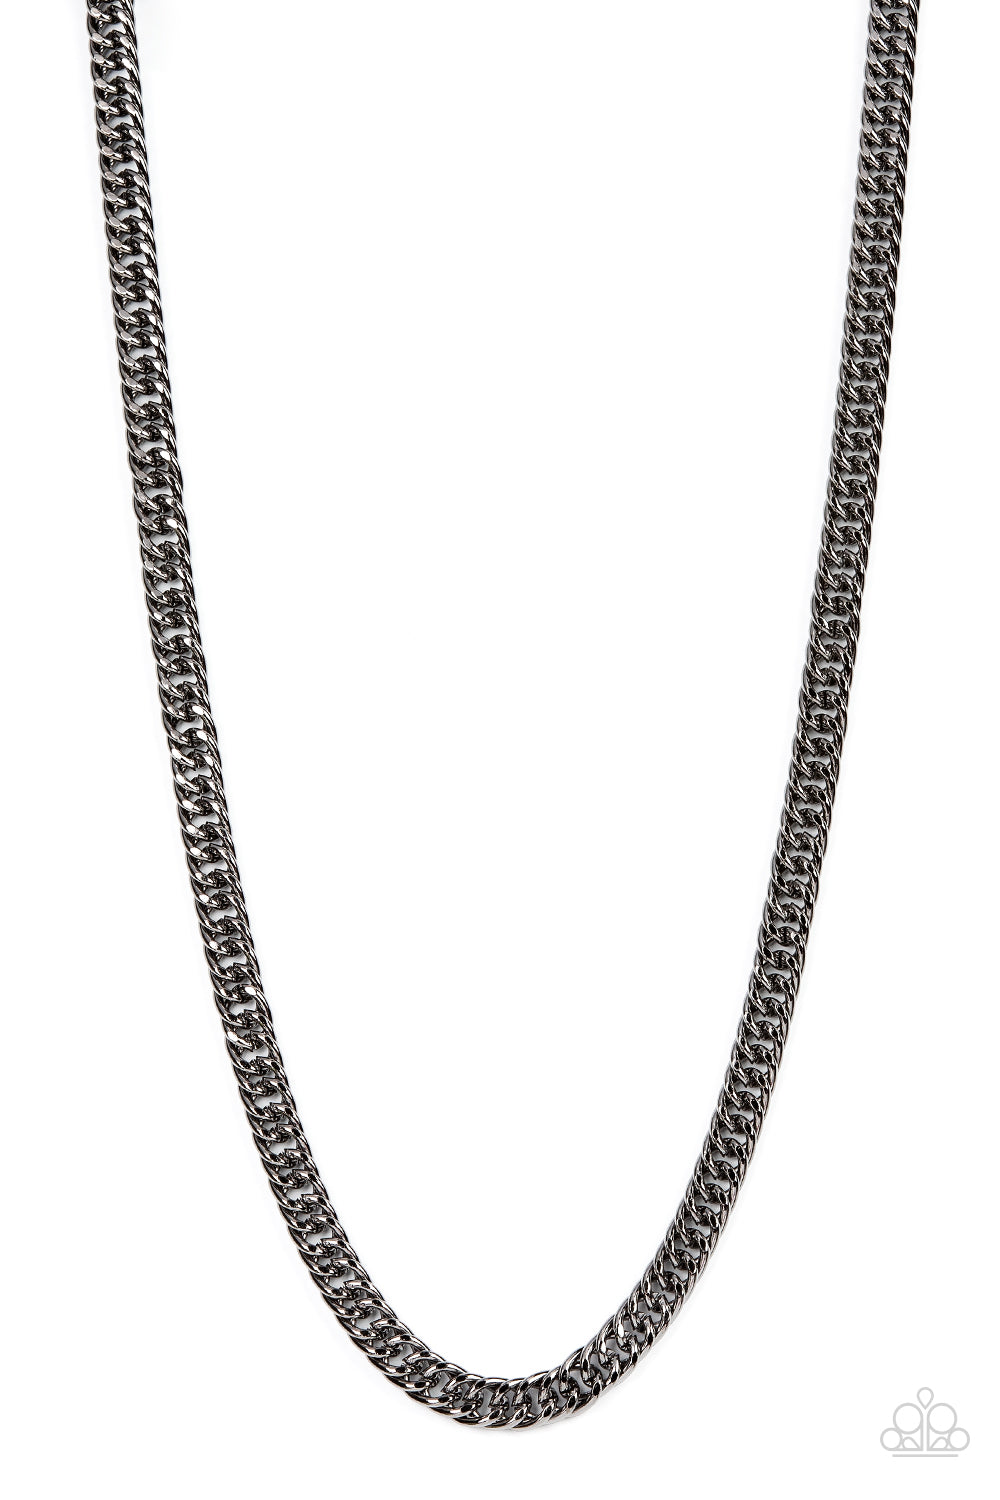 Featuring flashy faceted finishes, oval gunmetal links daringly interlock into a bold curb-like chain across the chest of a classic urban finish. Features an adjustable clasp closure.  Sold as one individual necklace.